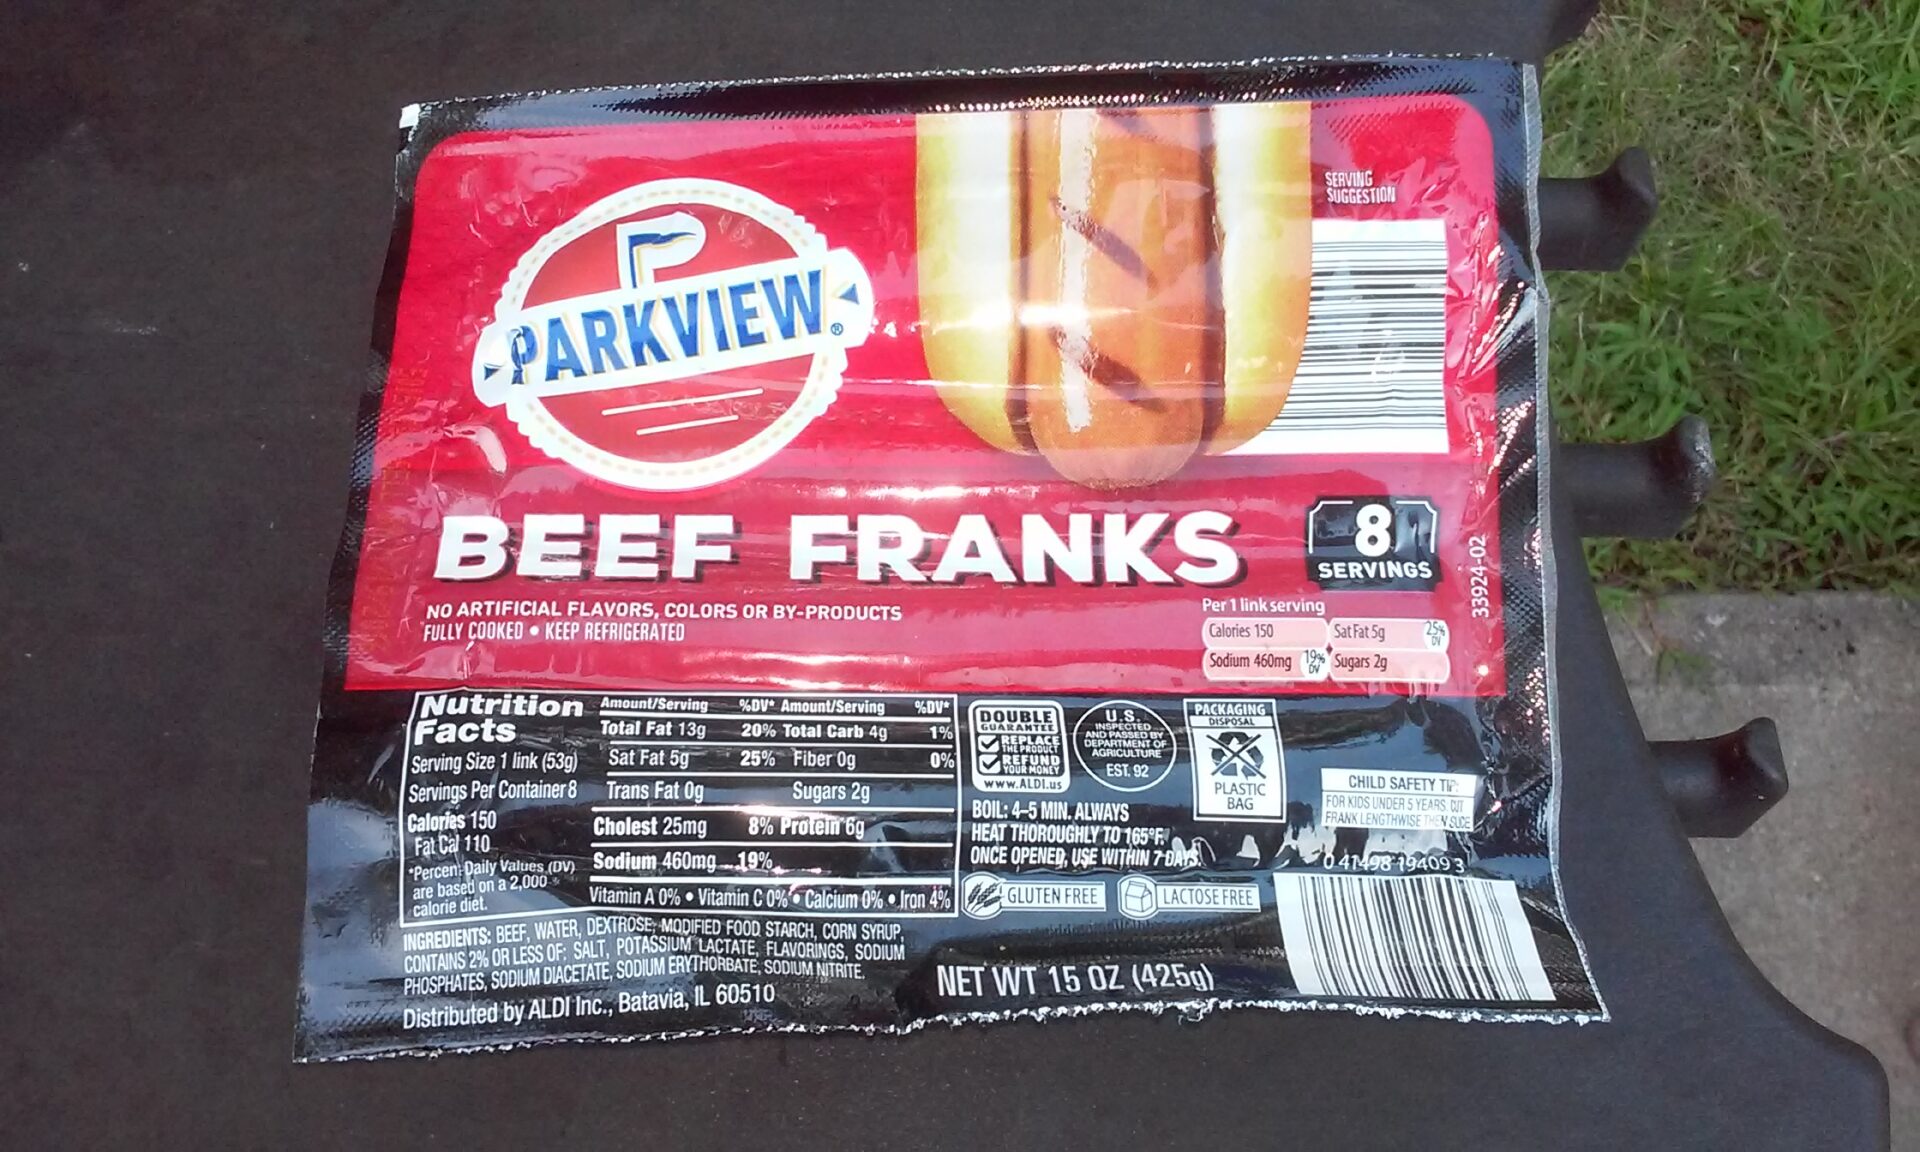 Parkview Beef Franks